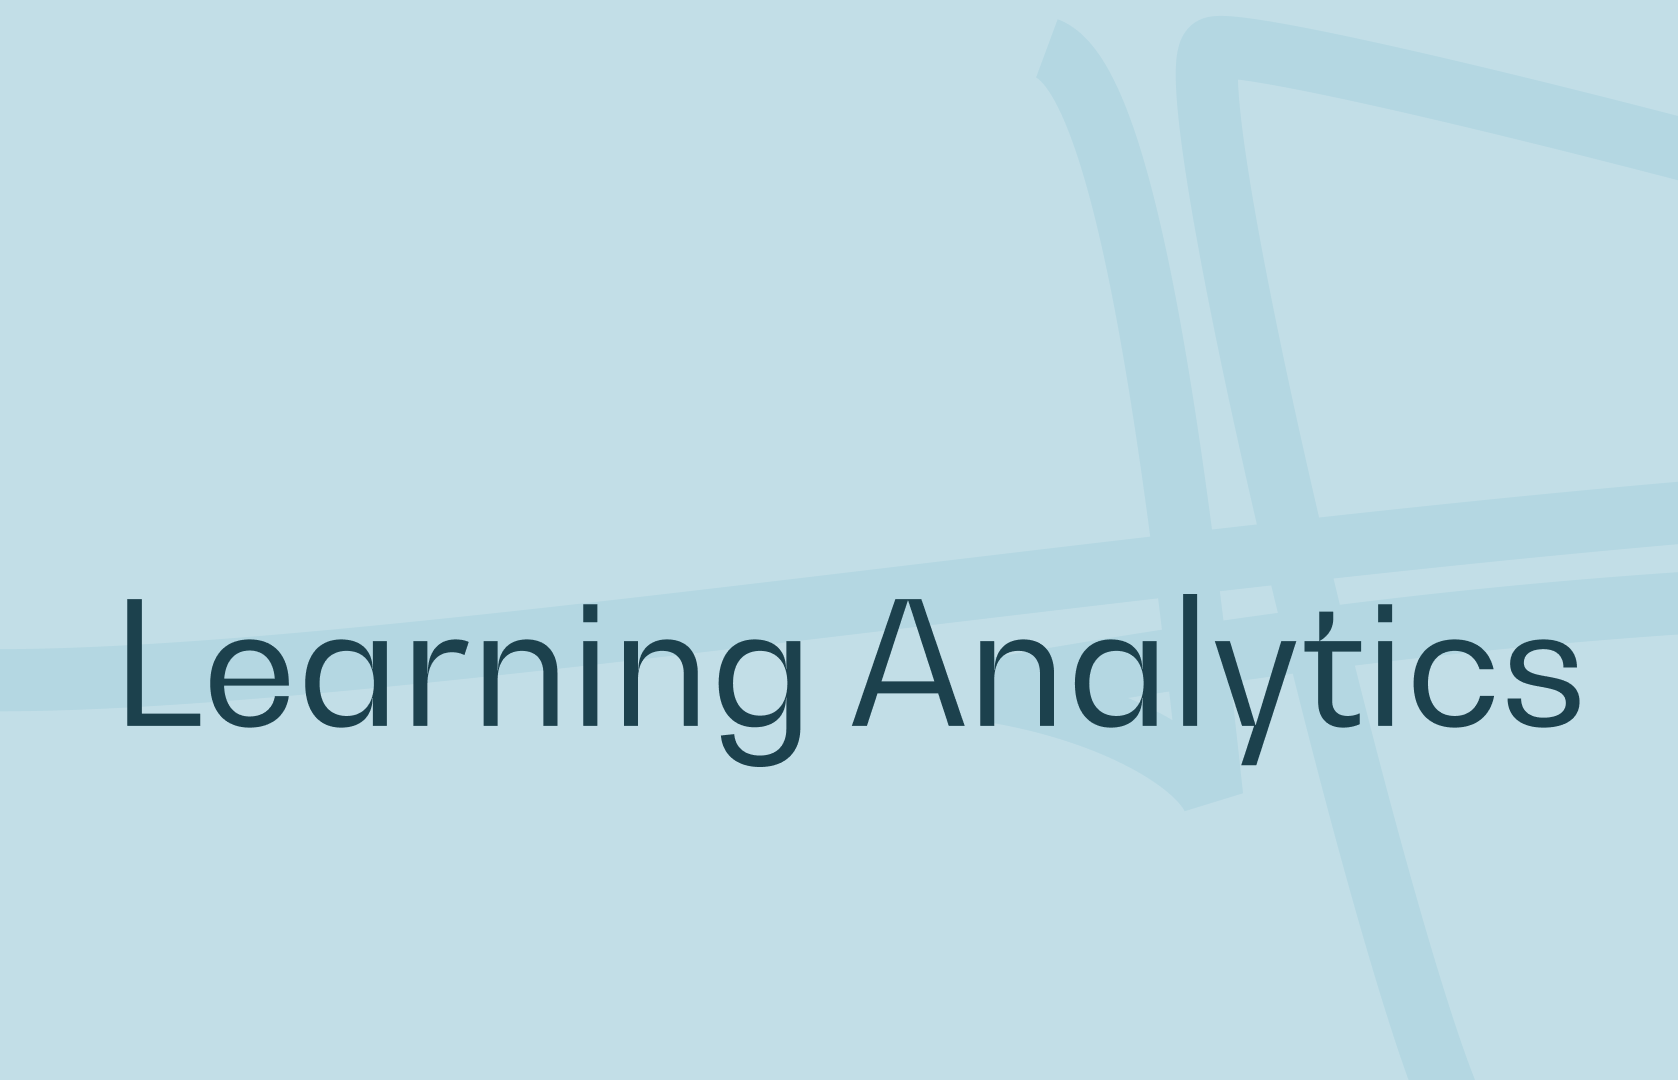 Learning Analytics definition